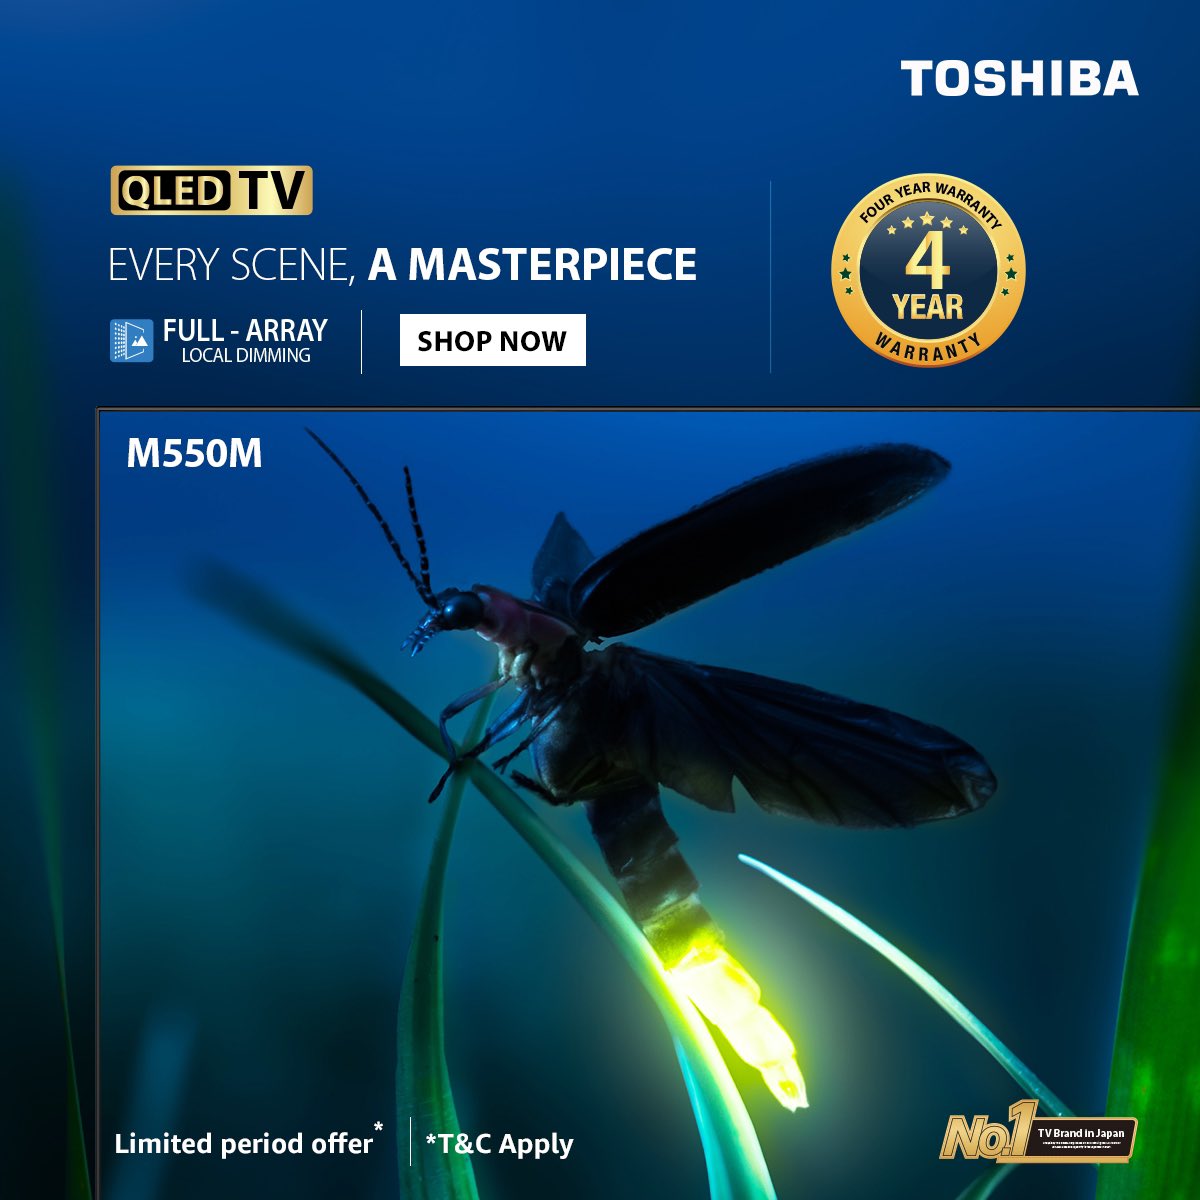 Elevate visuals with Full Array Local Dimming. Limited-time offer - 4 year warranty Buy Now: bit.ly/3FsybuB bit.ly/3I6qv2a #ToshibaTV #M550MP